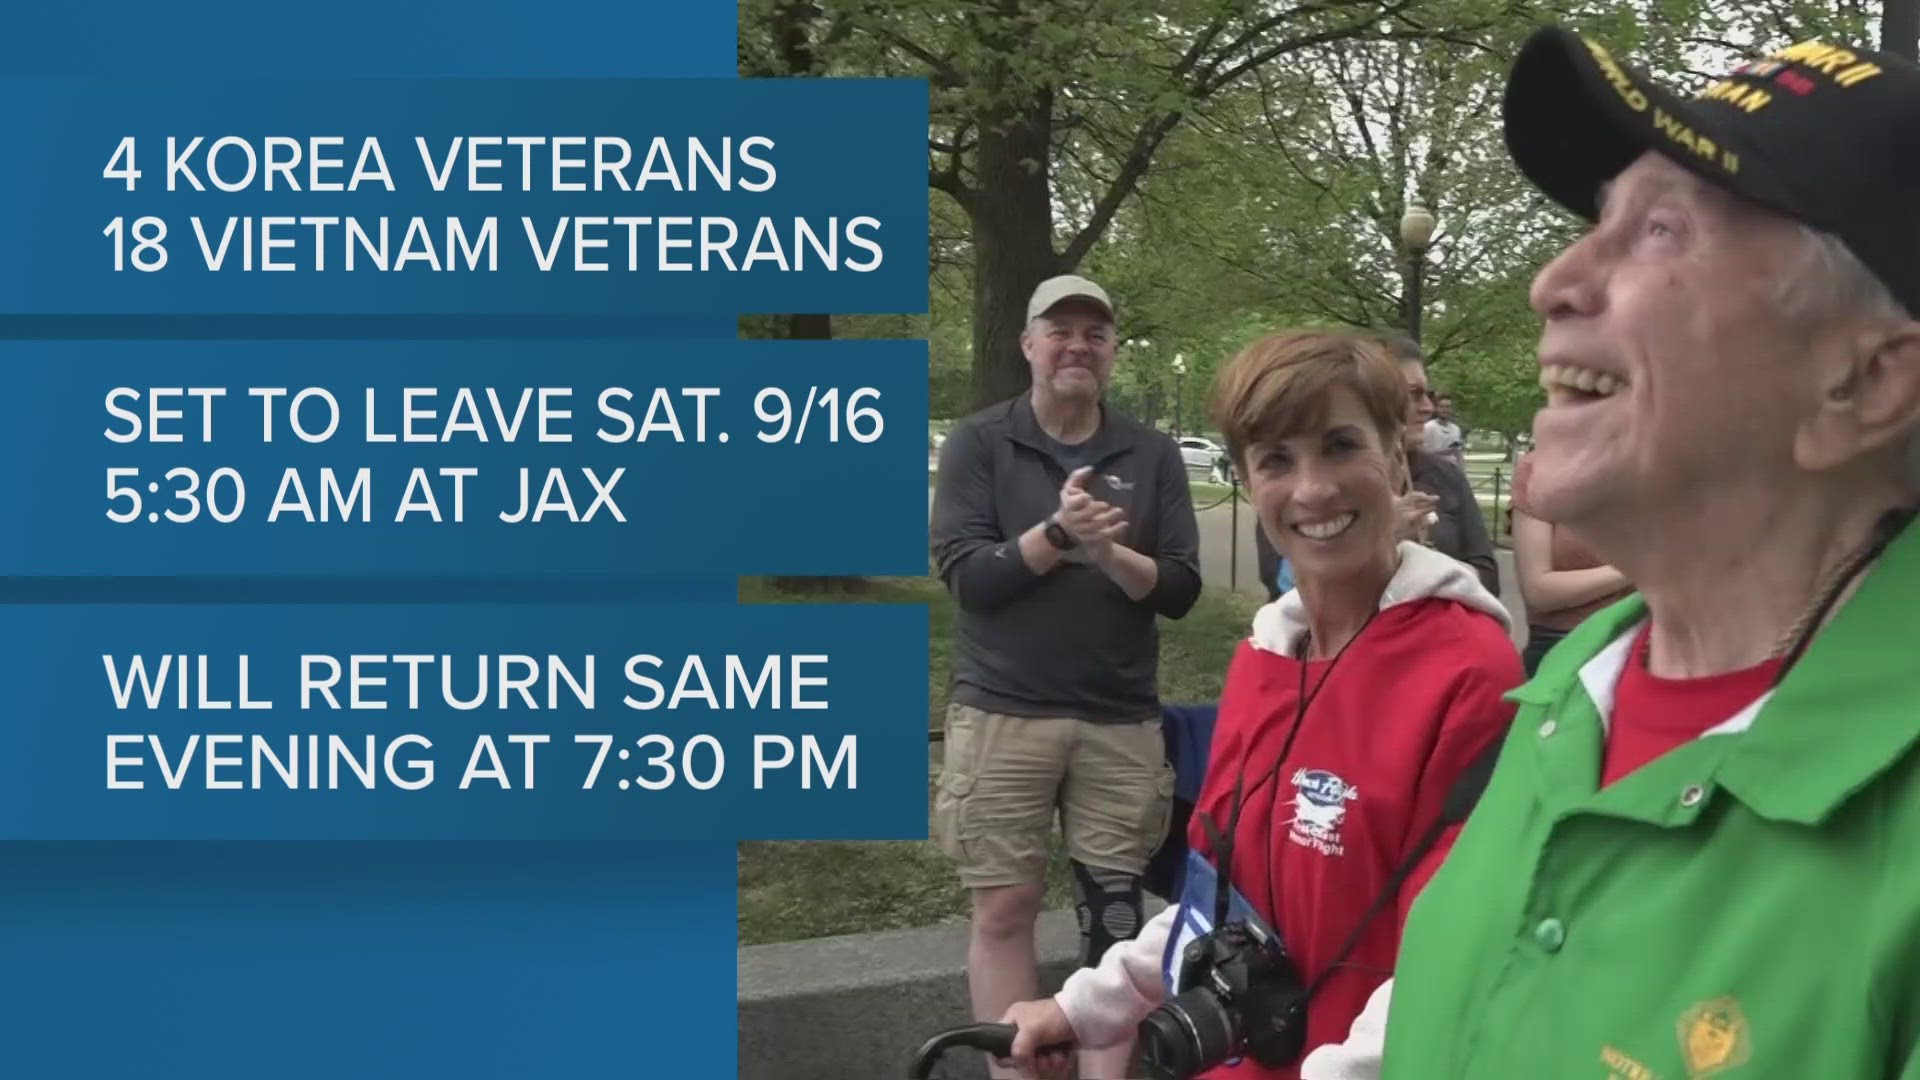 22 veterans will travel to Washington D.C. on Sept. 16 at 5:30 a.m. and return back to Jacksonville at 7:30 p.m. on the same day.